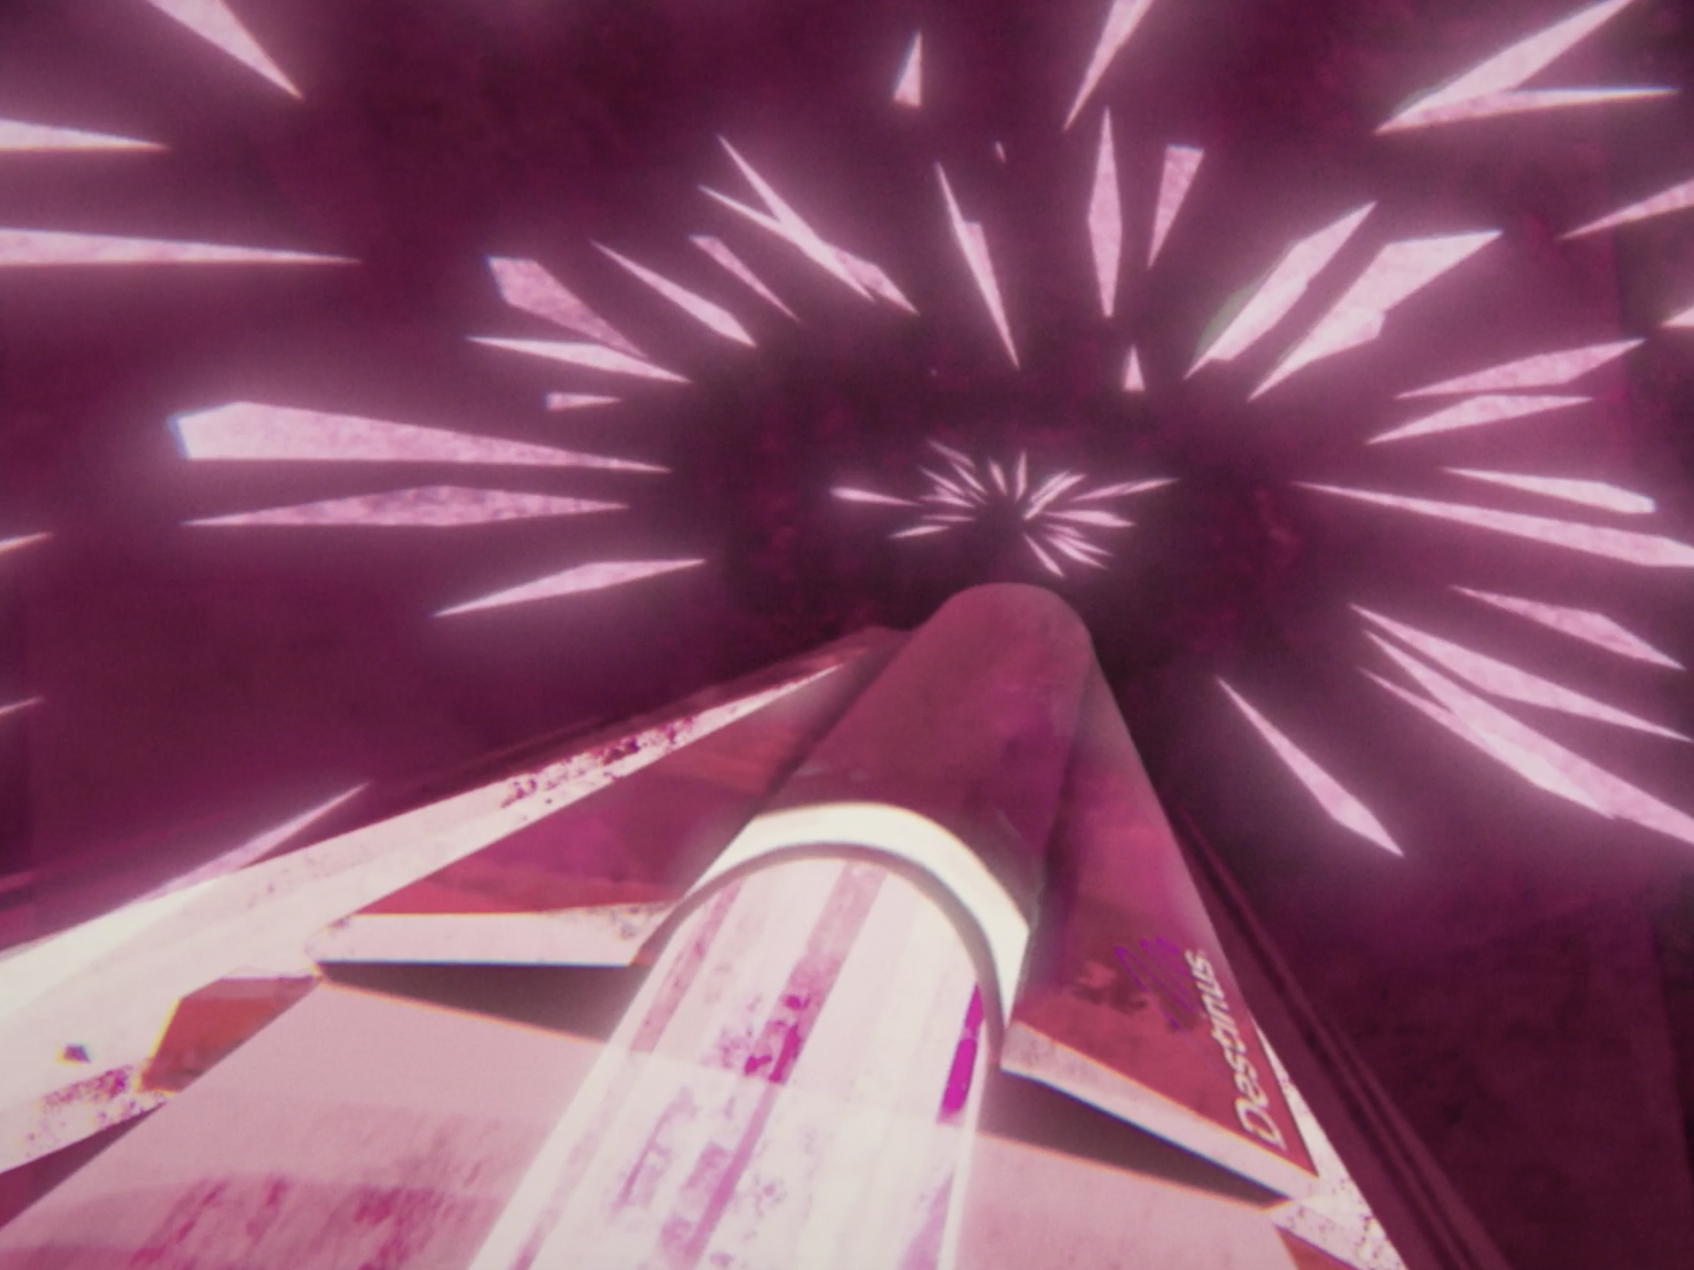 Destinus at hypersonic speed with pink hue.